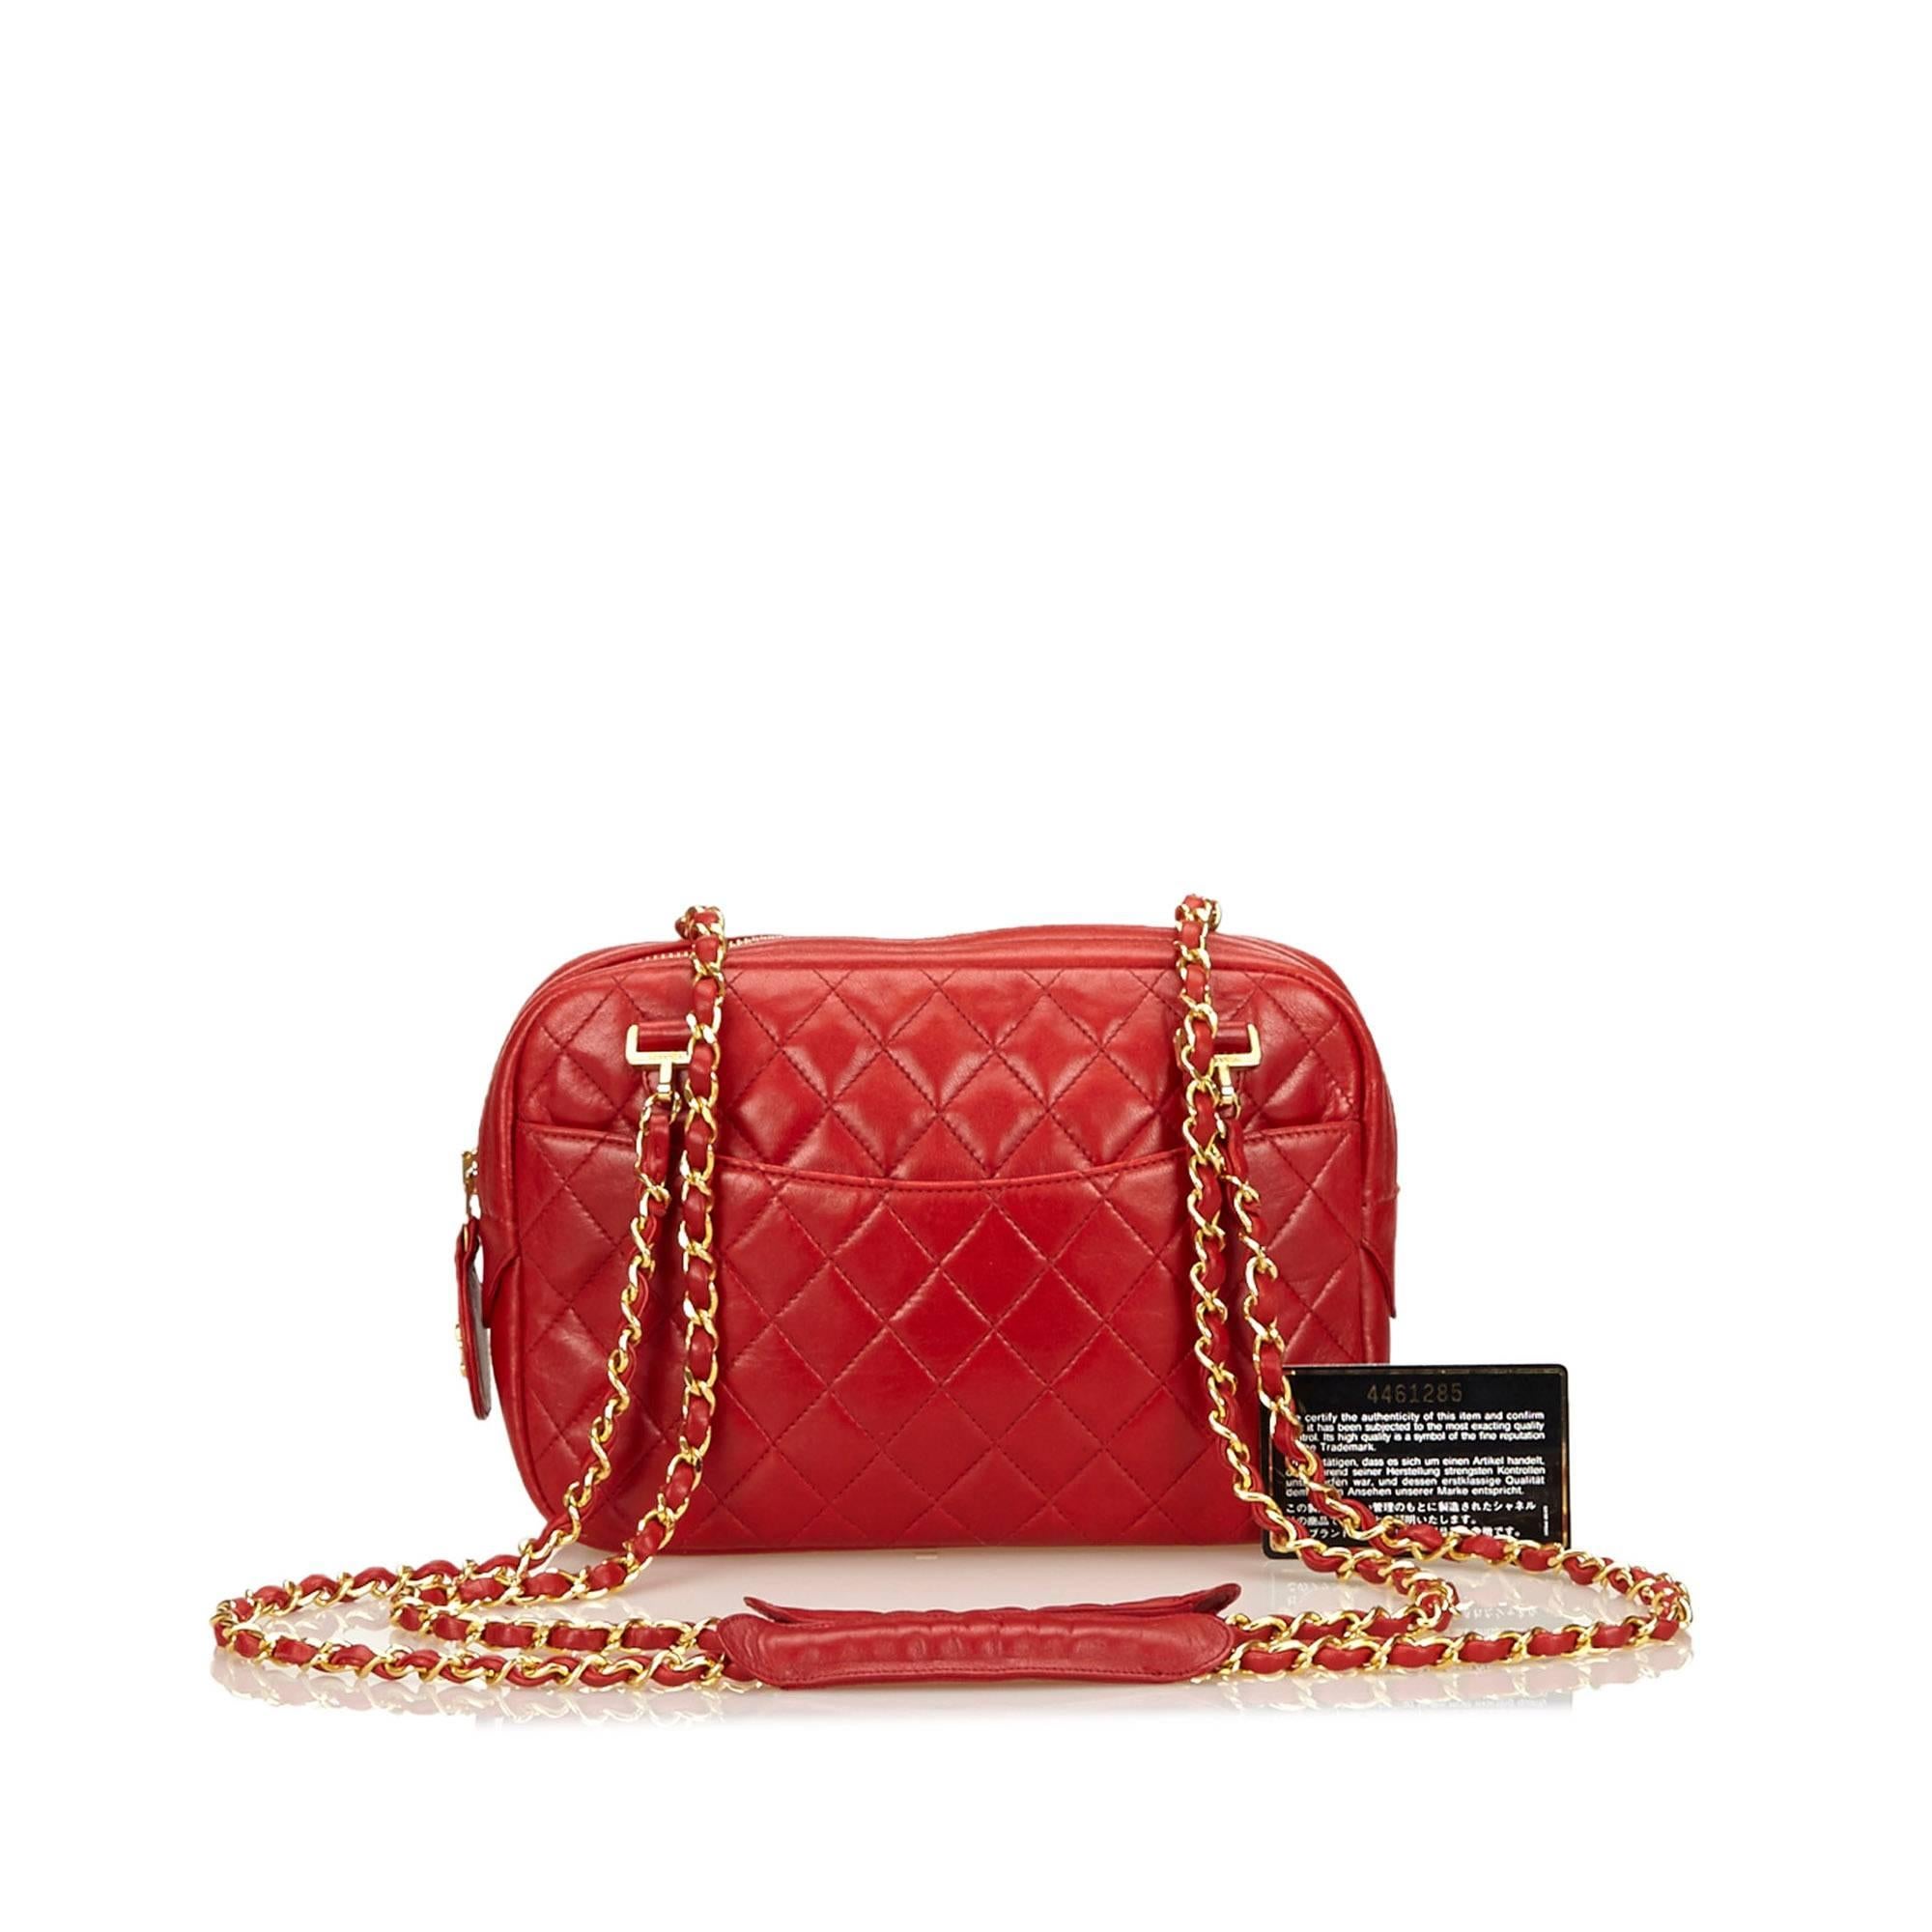 Red Chanel Quilted Lambskin Shoulder Bag 2